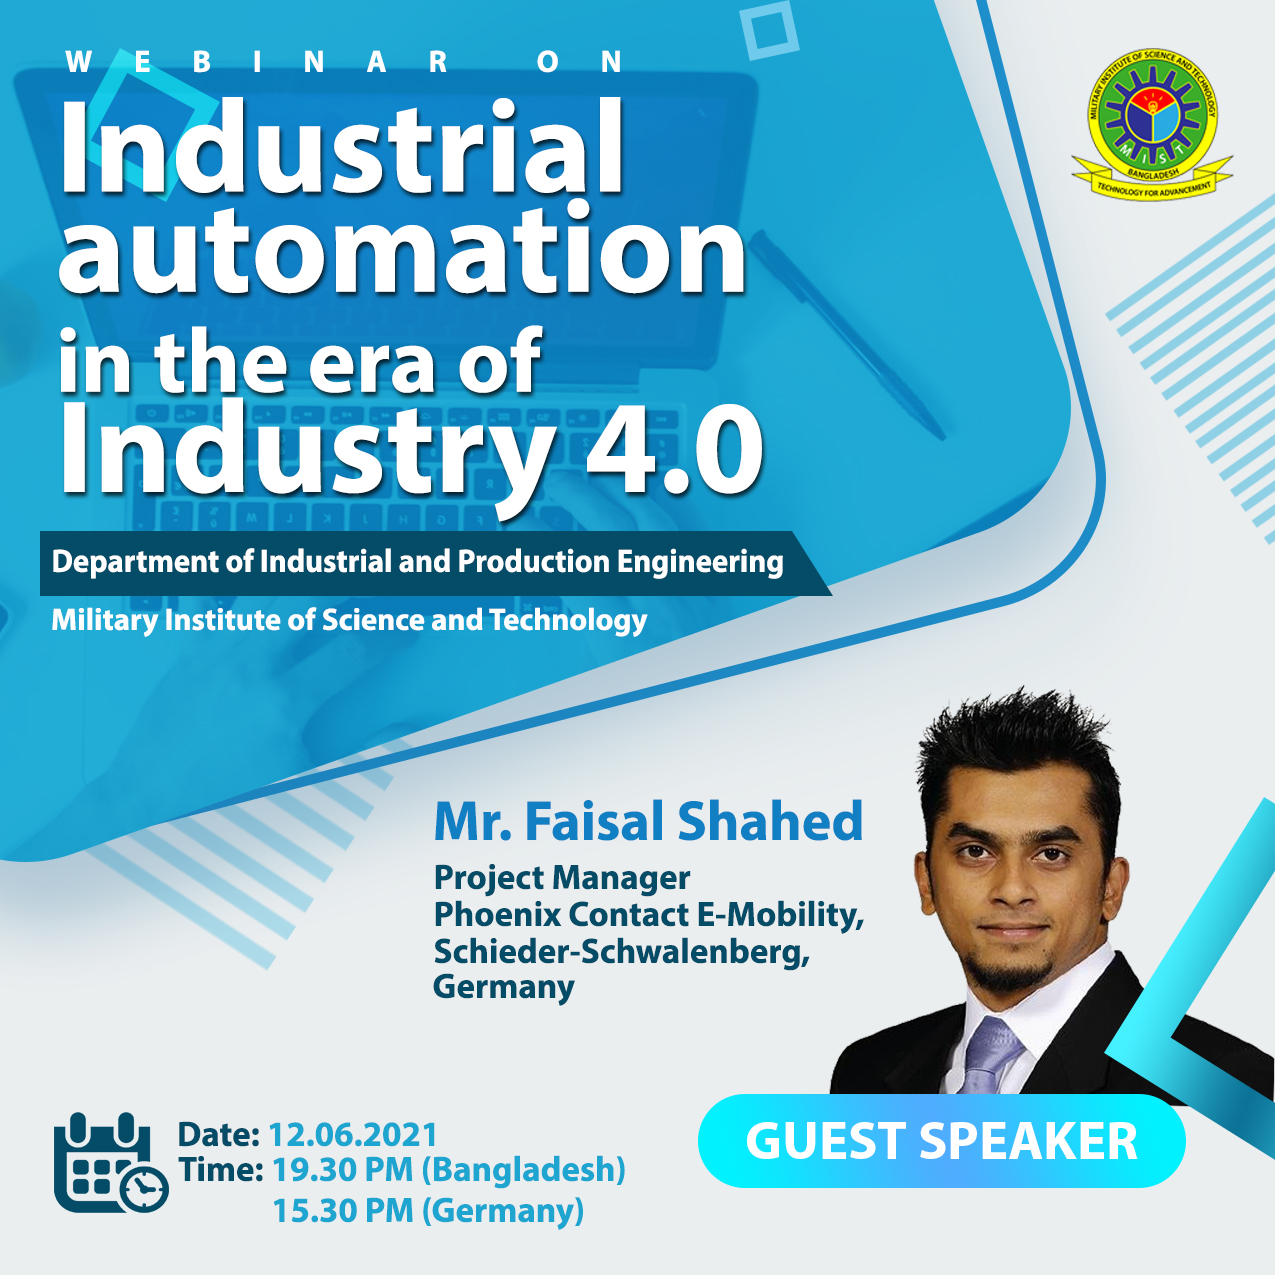 Industrial automation in the era of Industry 4.0